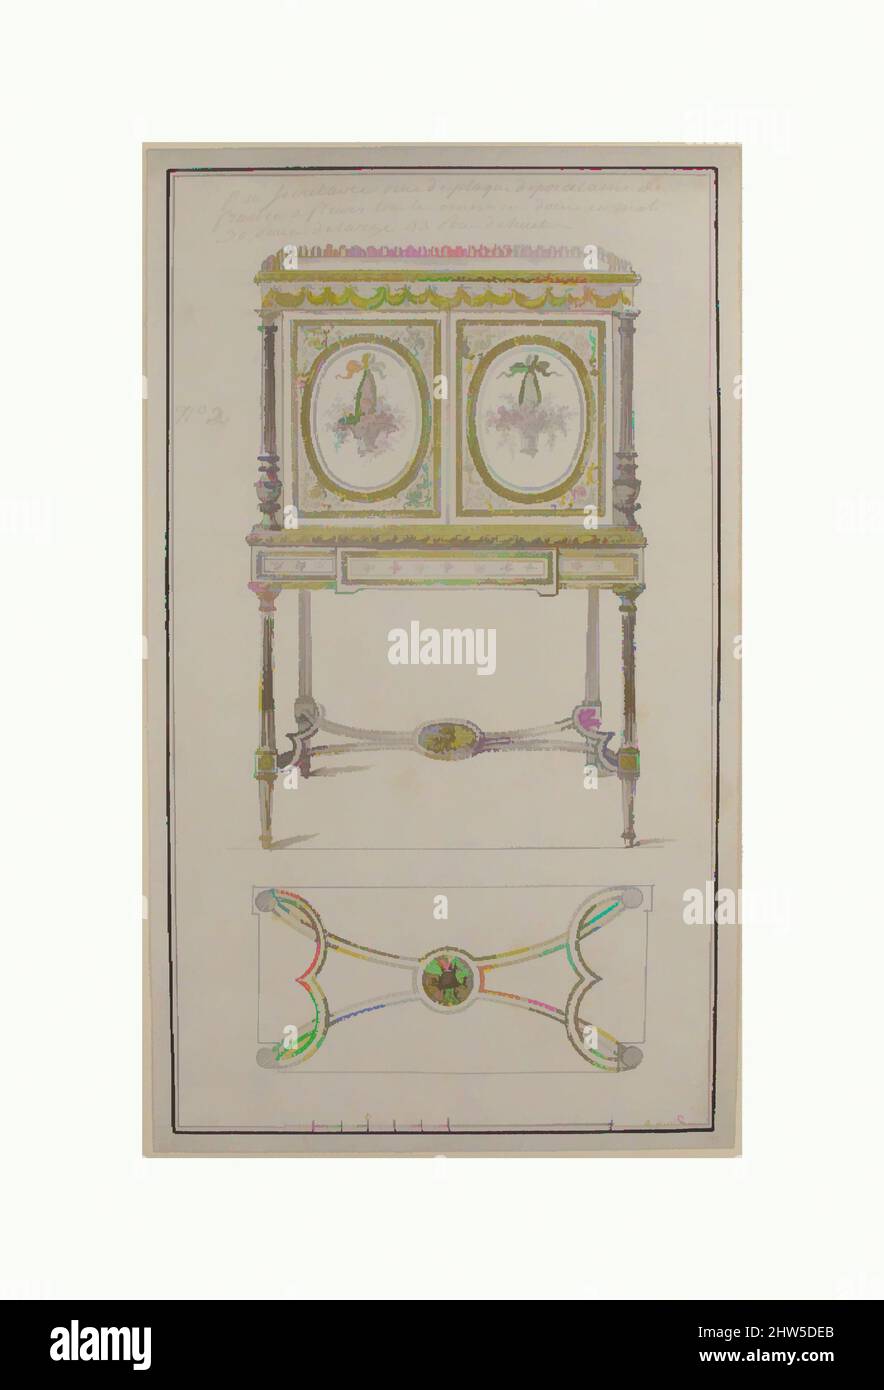 Art inspired by Design for an Upright Drop-Front Secretary, ca. 1780, Pen and black ink, brush and gray and colored wash. Framing lines in pen and ink., 15 1/2 x 9 1/16 in. (39.4 x 23.0 cm), Drawings, Anonymous, French, 18th century, Classic works modernized by Artotop with a splash of modernity. Shapes, color and value, eye-catching visual impact on art. Emotions through freedom of artworks in a contemporary way. A timeless message pursuing a wildly creative new direction. Artists turning to the digital medium and creating the Artotop NFT Stock Photo